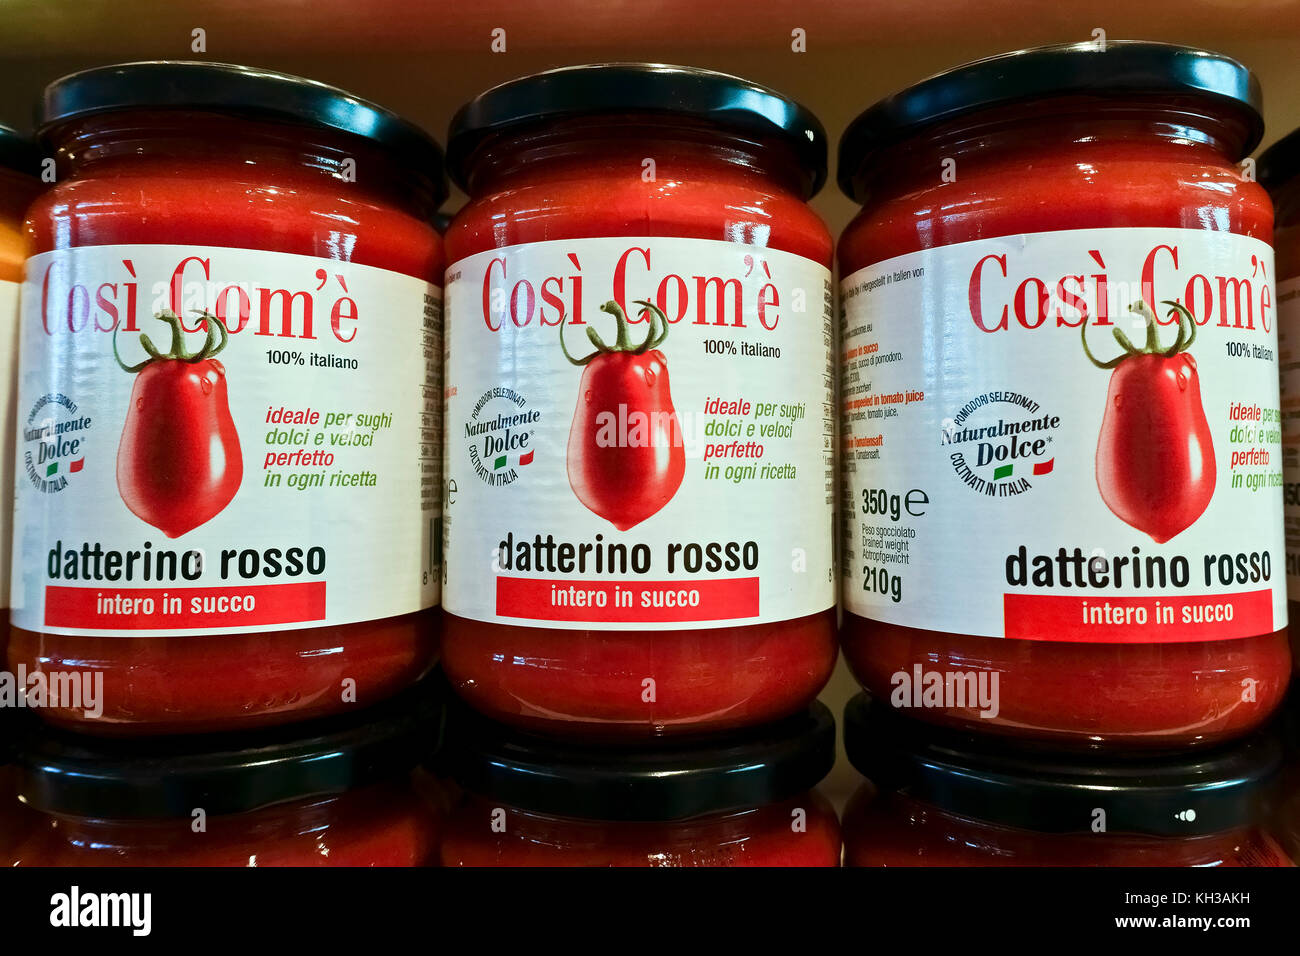 Tomato passata puree sauce for pasta displayed for sale. Peeled tomatoes sauce jars aligned on a shelf. Mediterranean healthy diet. Close up. Stock Photo